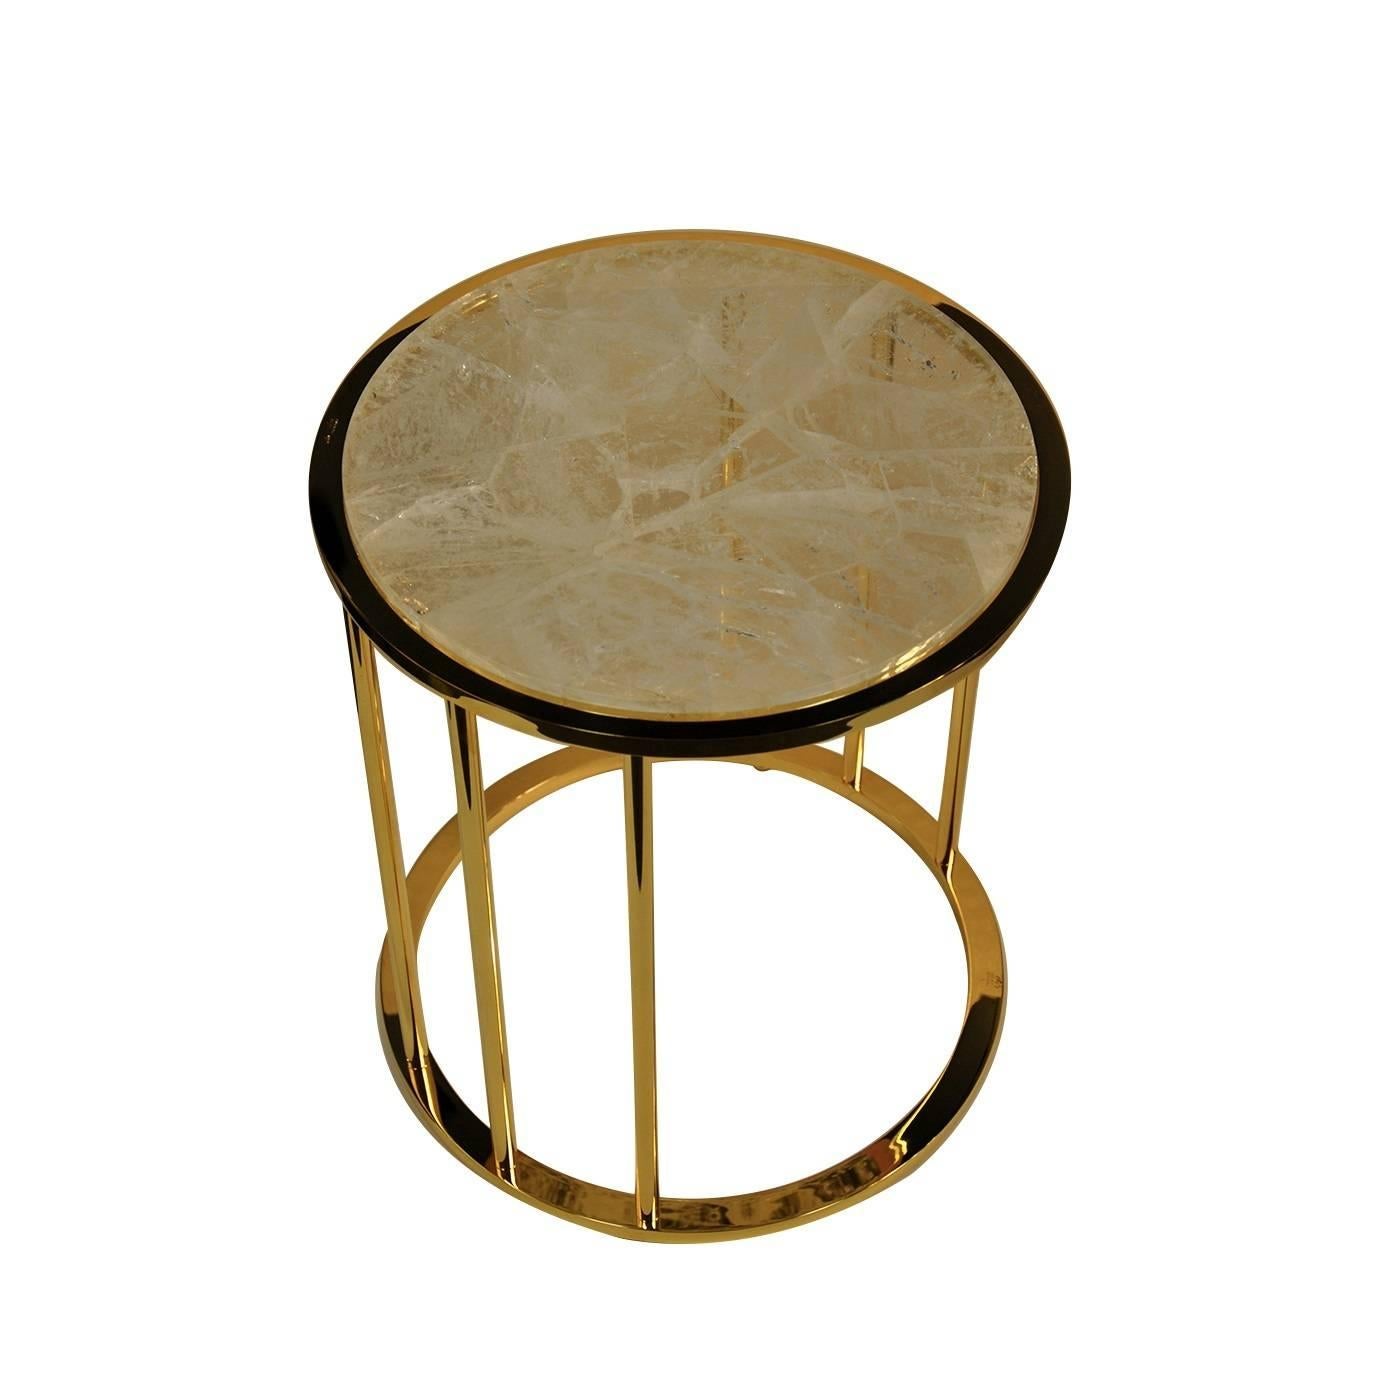 This elegant handmade side table will make a sophisticated addition to a living room or bed room with its Minimalist structure in nickel-plated brass with a lustrous gold finish, holding up its round sliced Brazilian hyaline quartz top. This